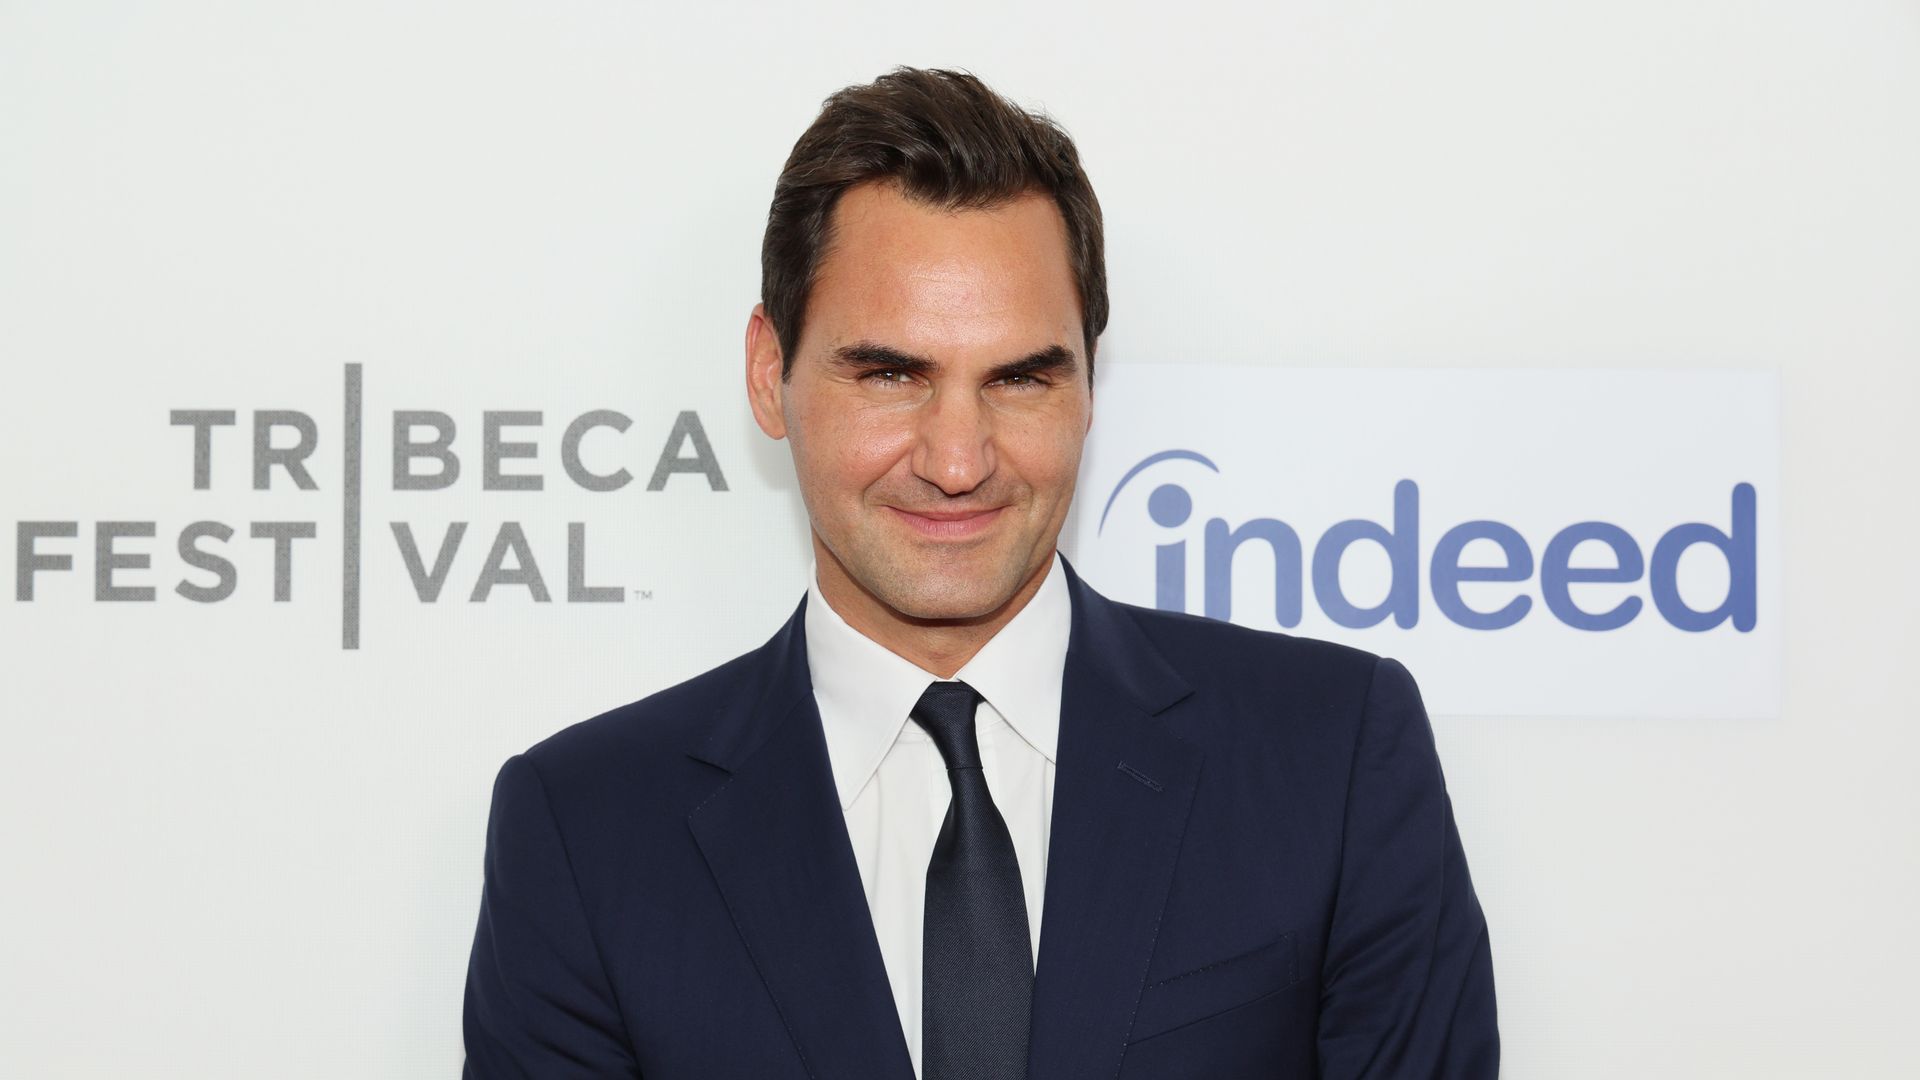 Roger Federer details decision to include family videos that were 'never' meant for the public in 'emotional' retirement documentary